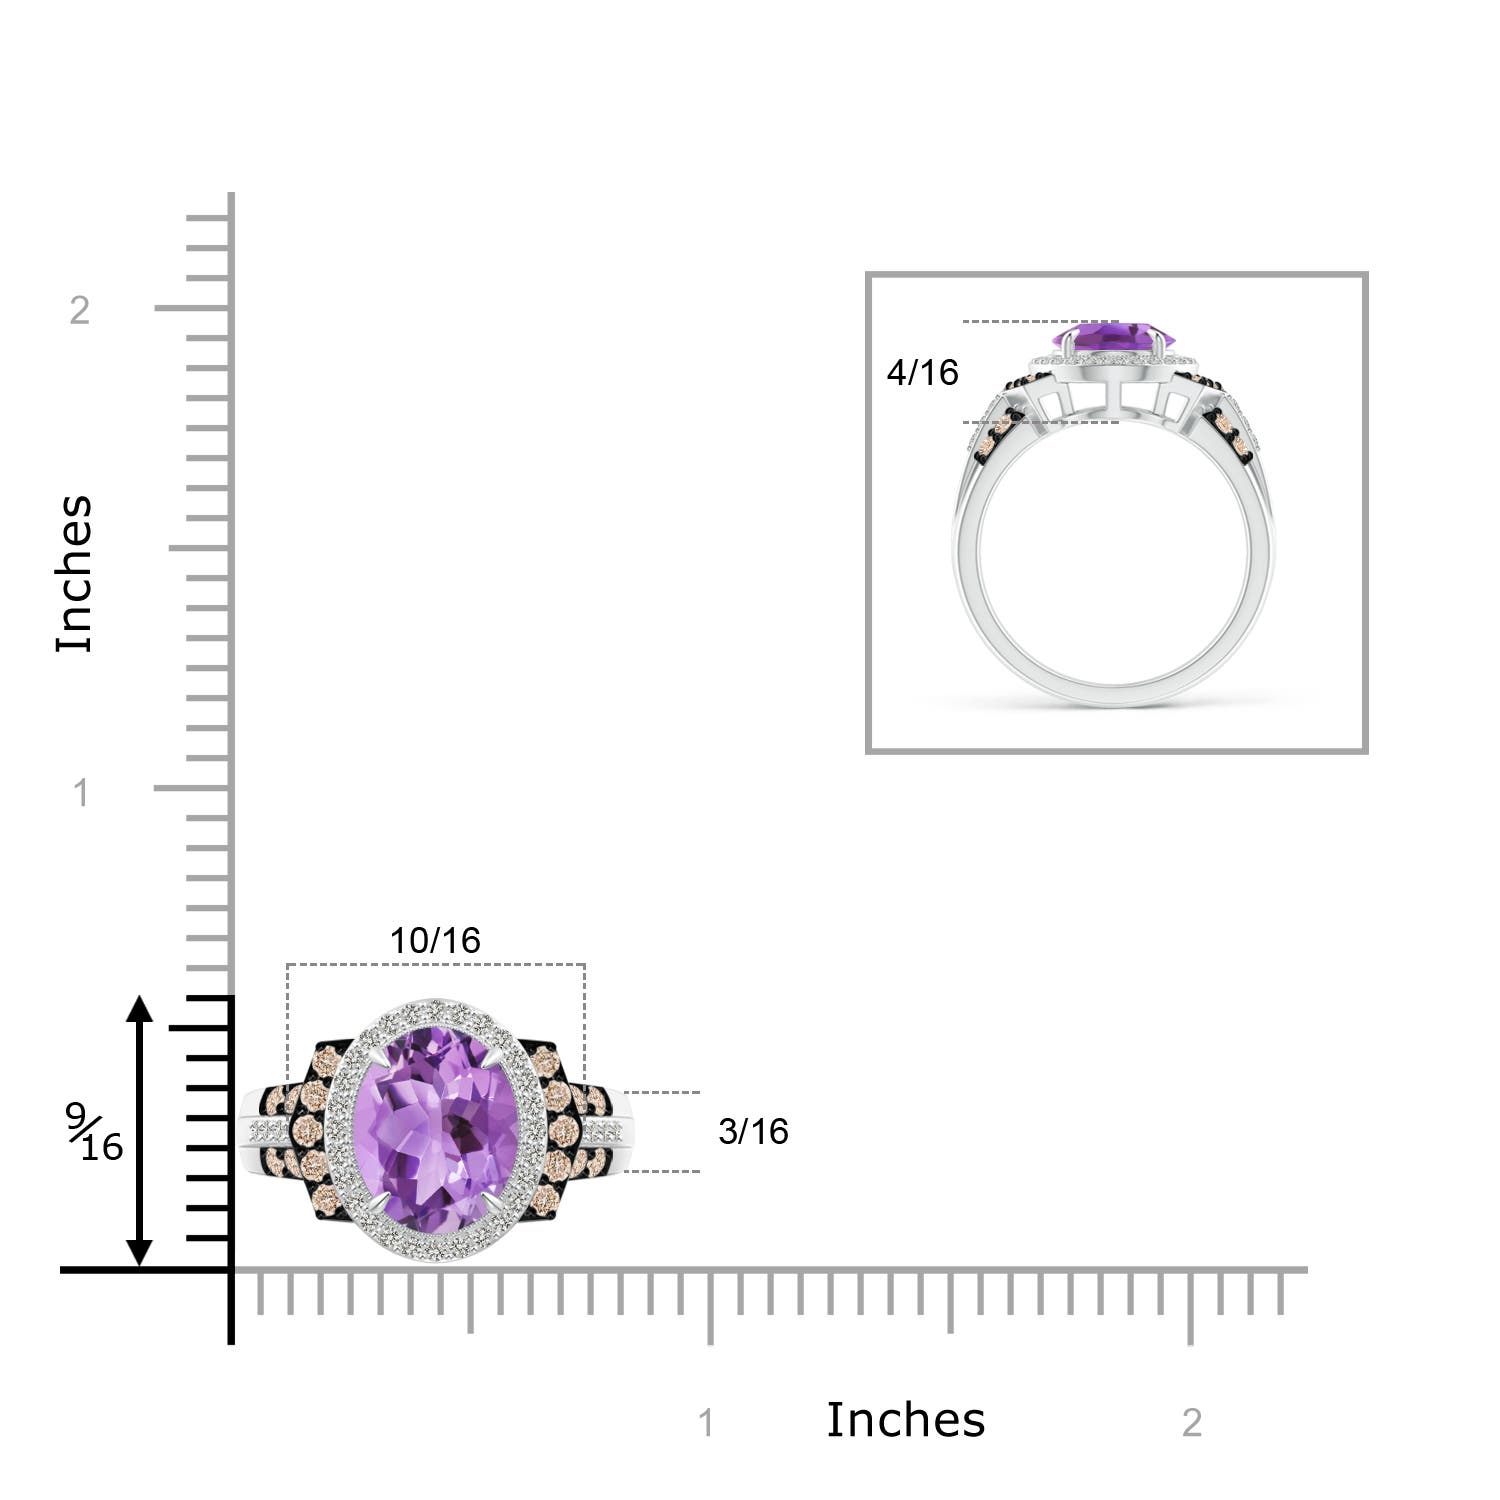 A - Amethyst / 2.81 CT / 14 KT White Gold